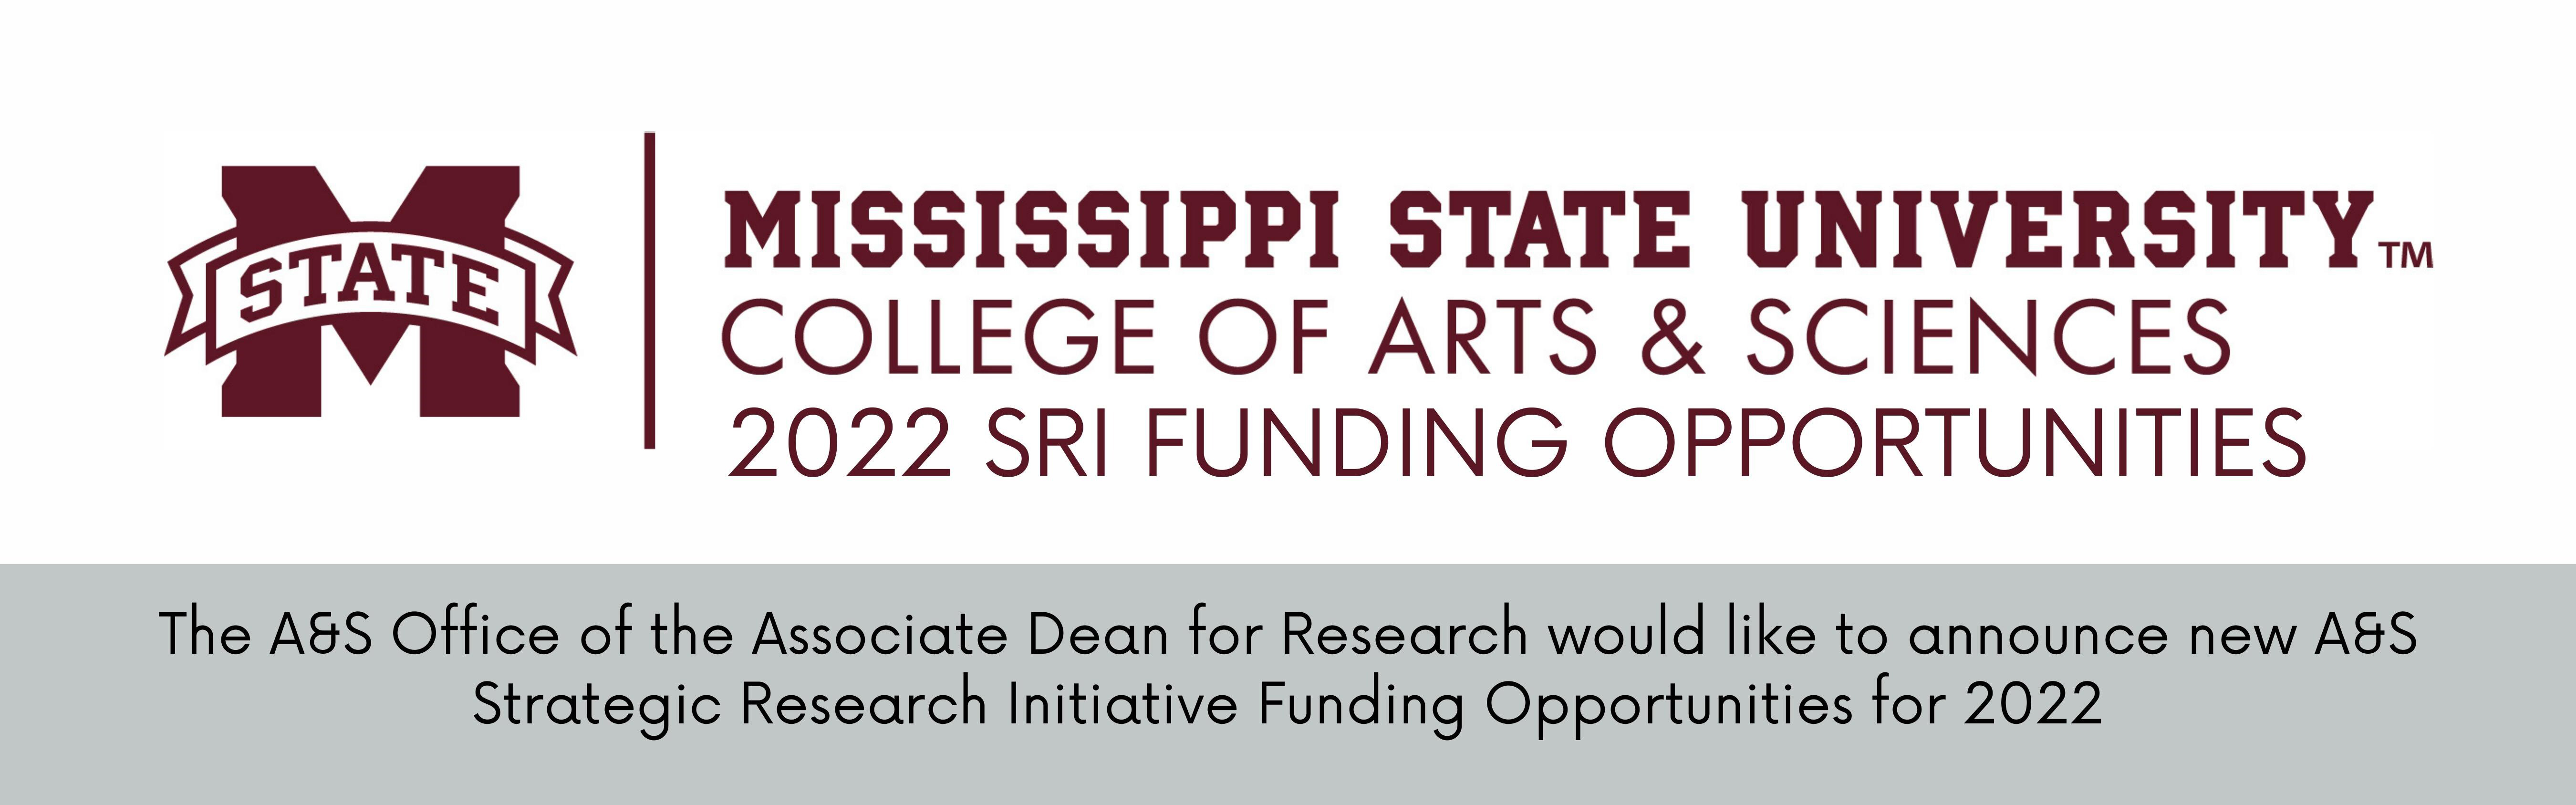 MSU College of Arts and Sciences 2022 SRI Funding Opportunities logo